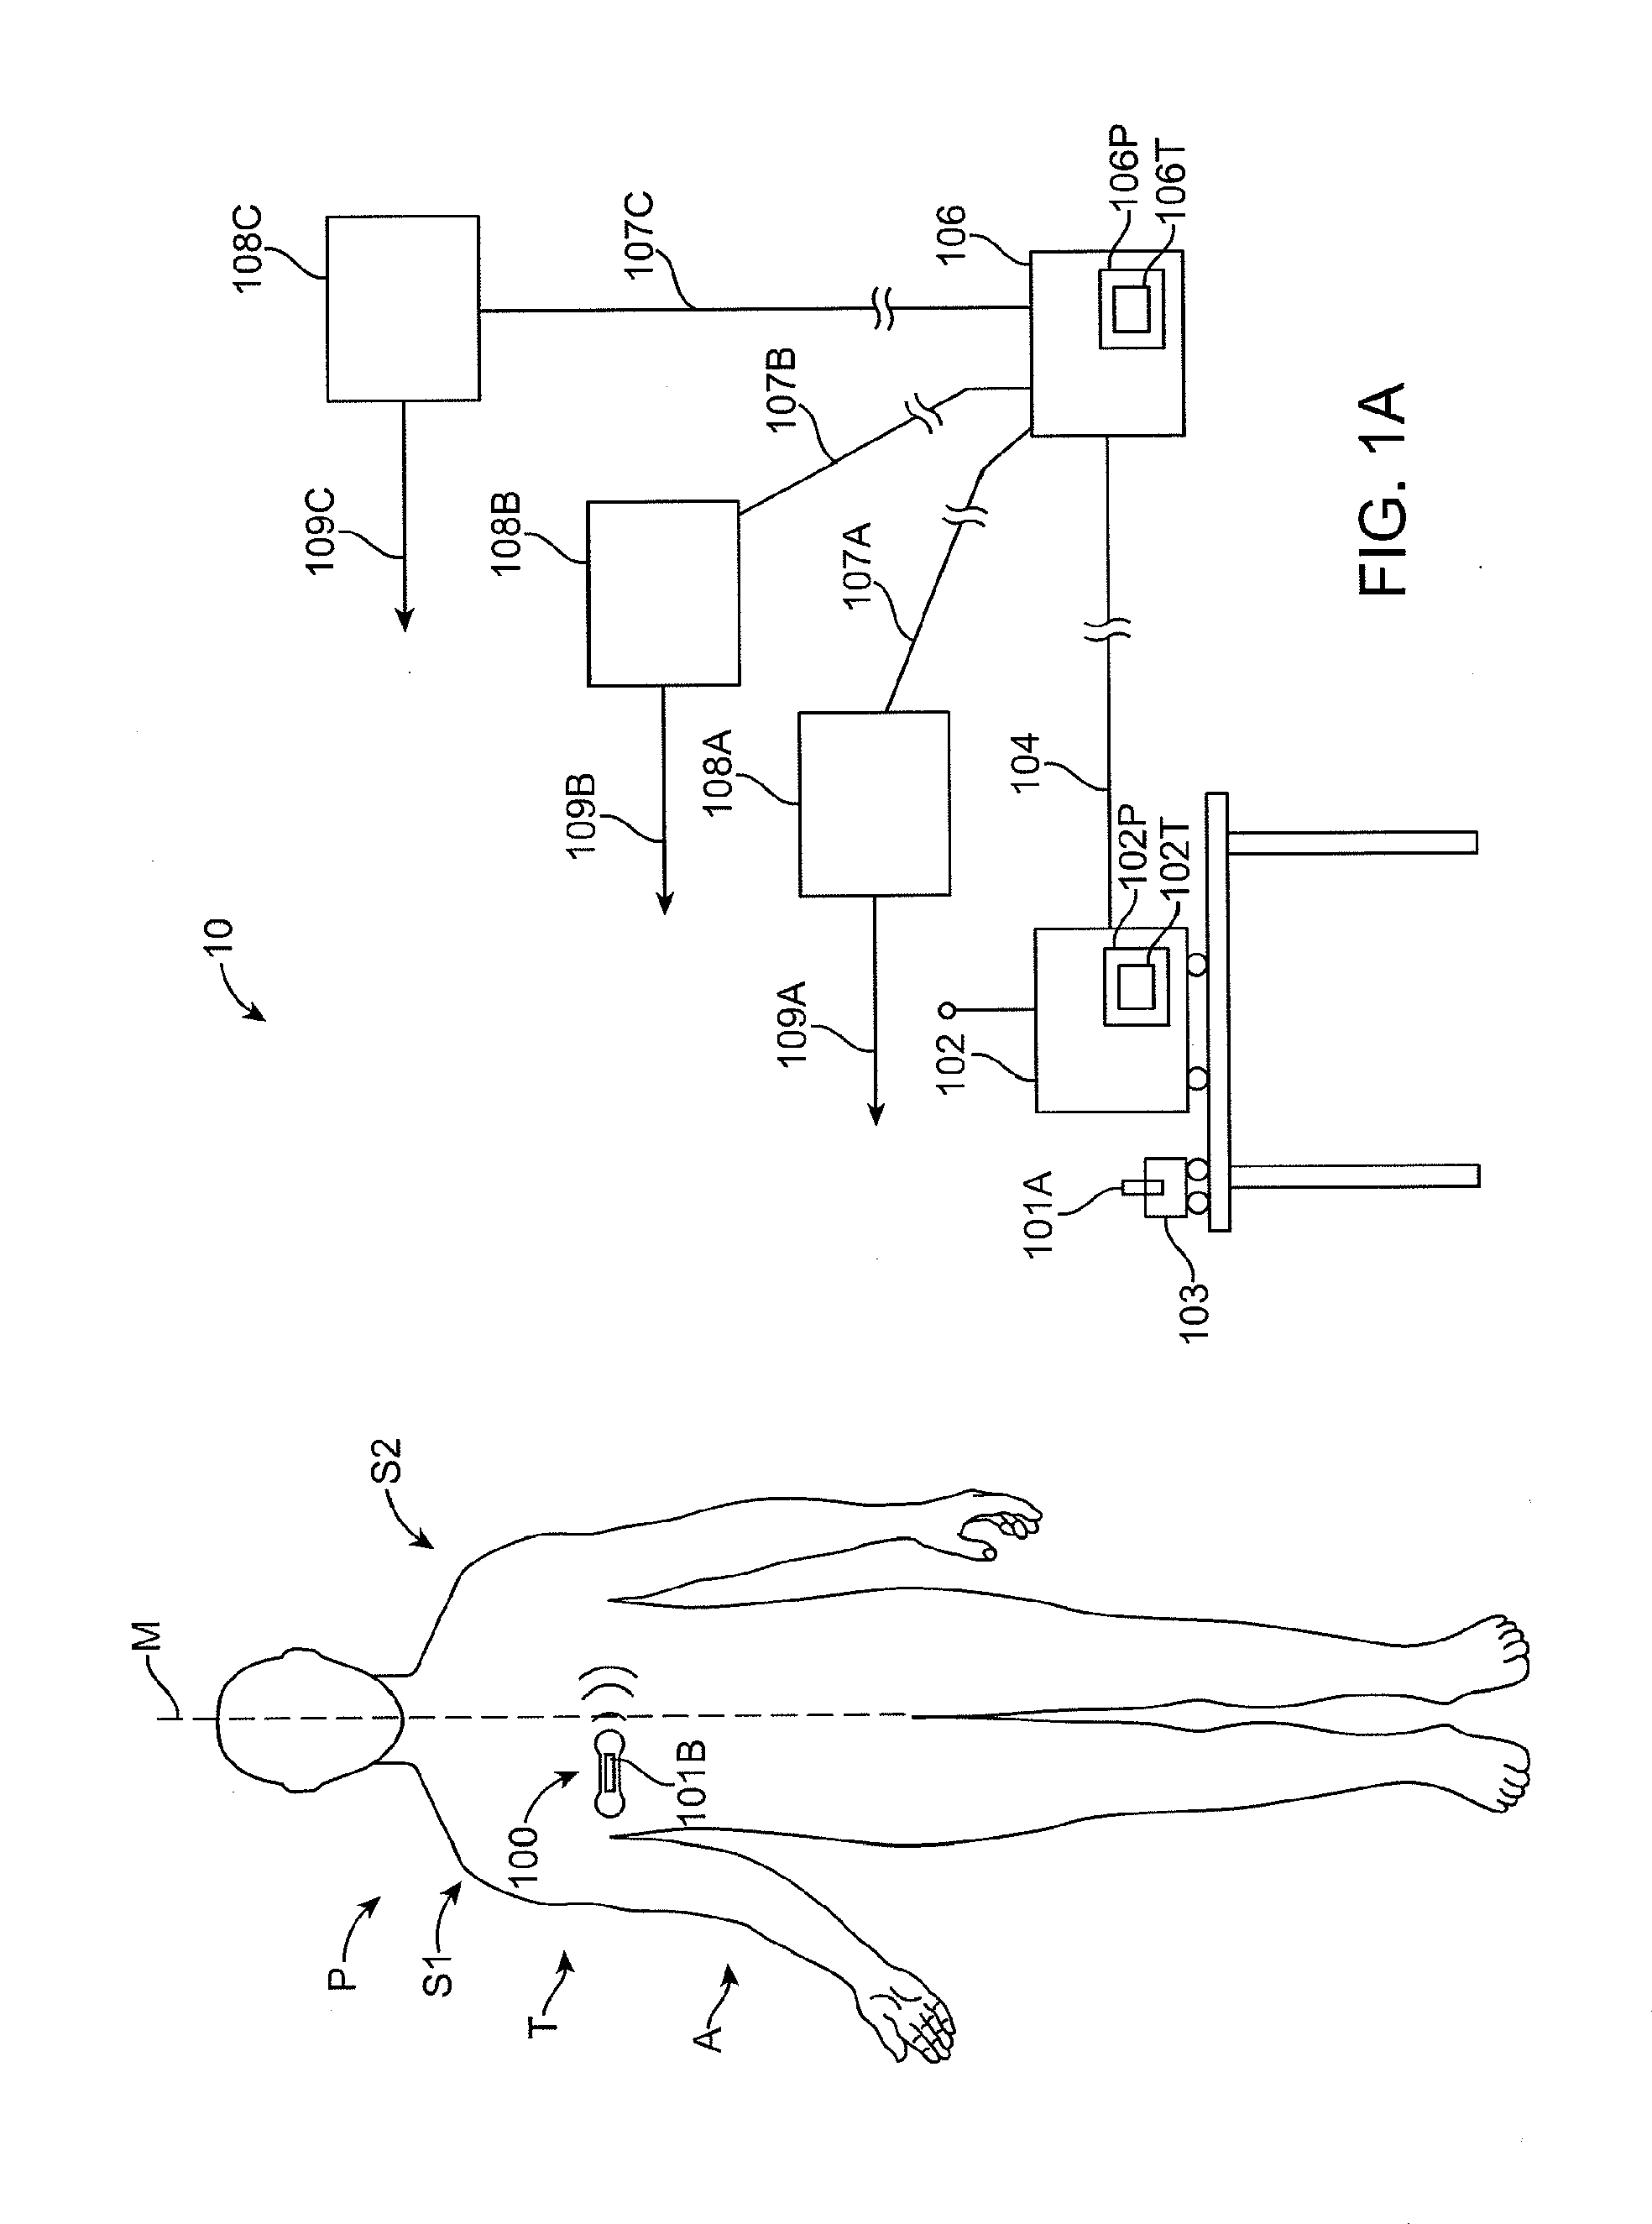 Method and Apparatus for Remote Detection and Monitoring of Functional Chronotropic Incompetence